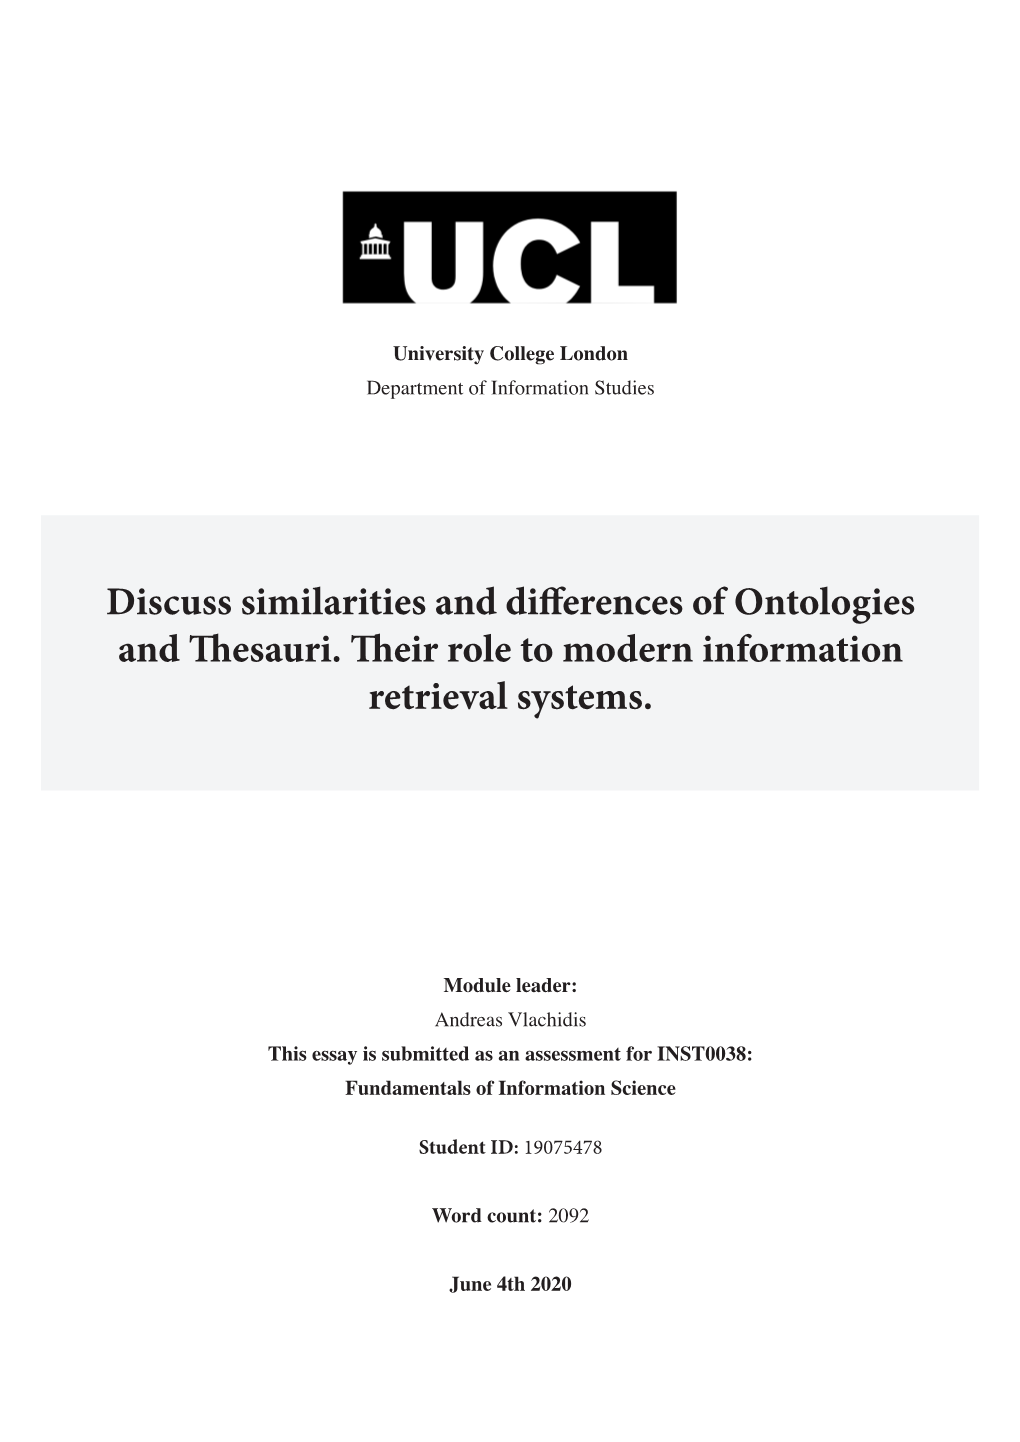 Discuss Similarities and Differences of Ontologies and Thesauri. Their Role to Modern Information Retrieval Systems